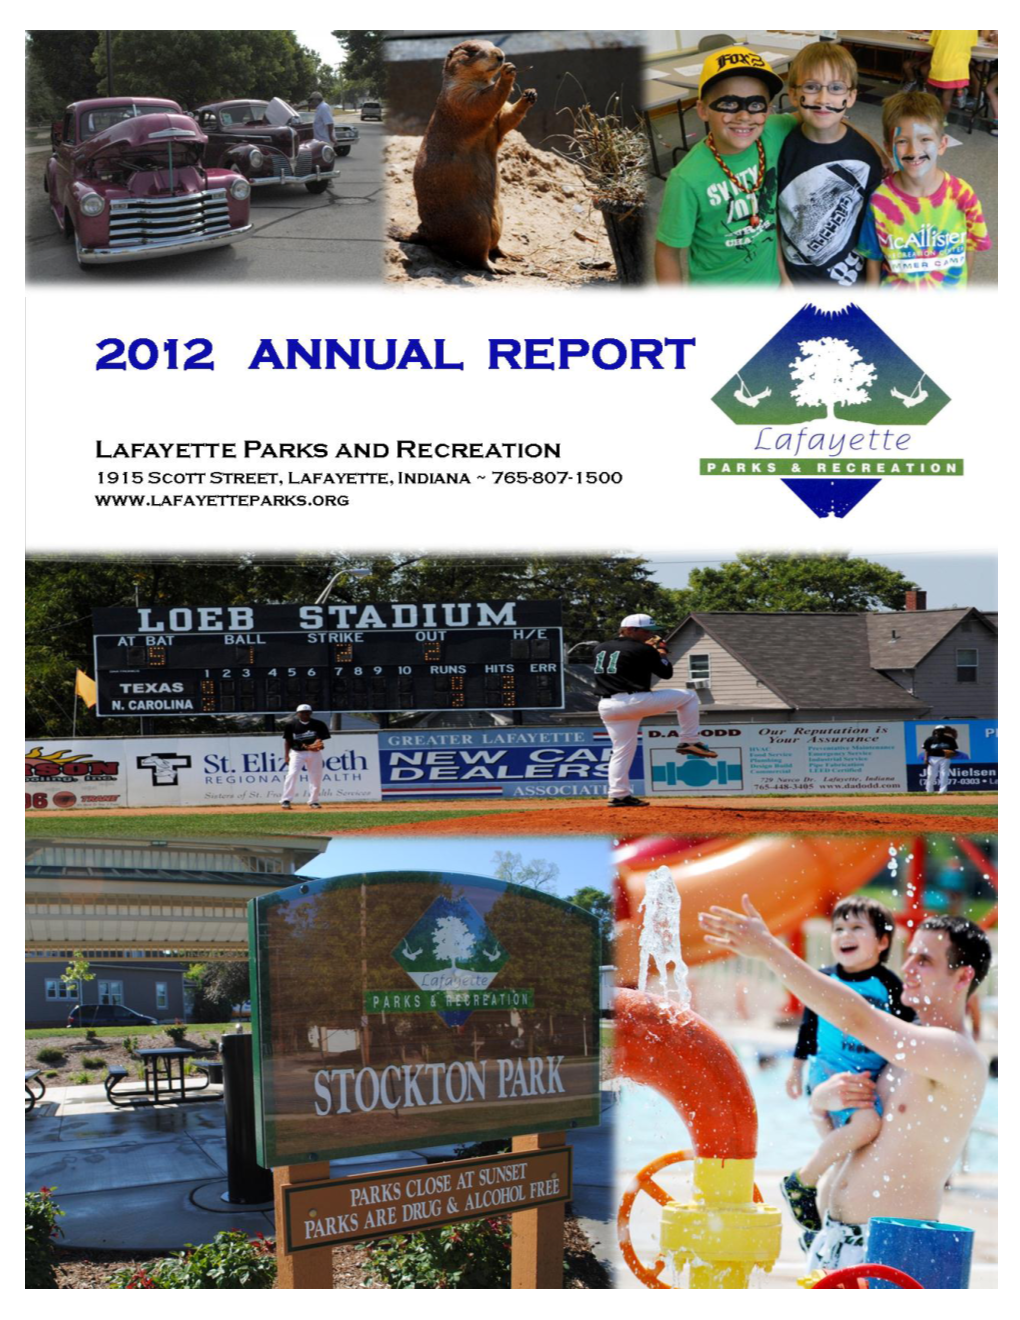 2012 Lafayette Parks Annual Report